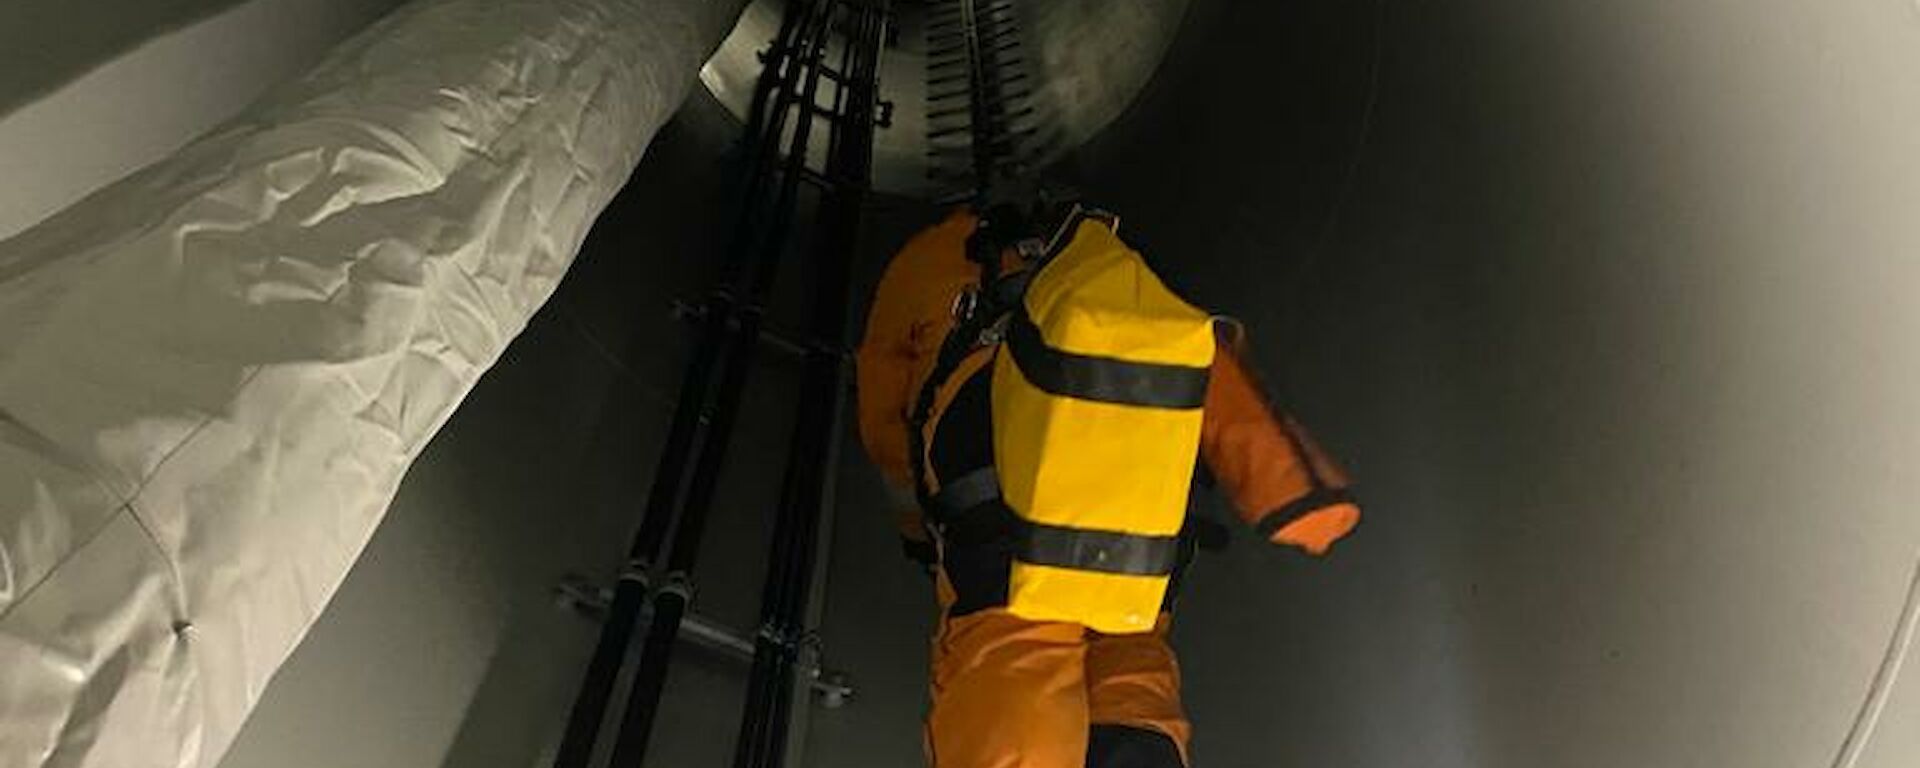 Looking up the inside of the wind turbine at ladder and expeditioner climbing up ahead